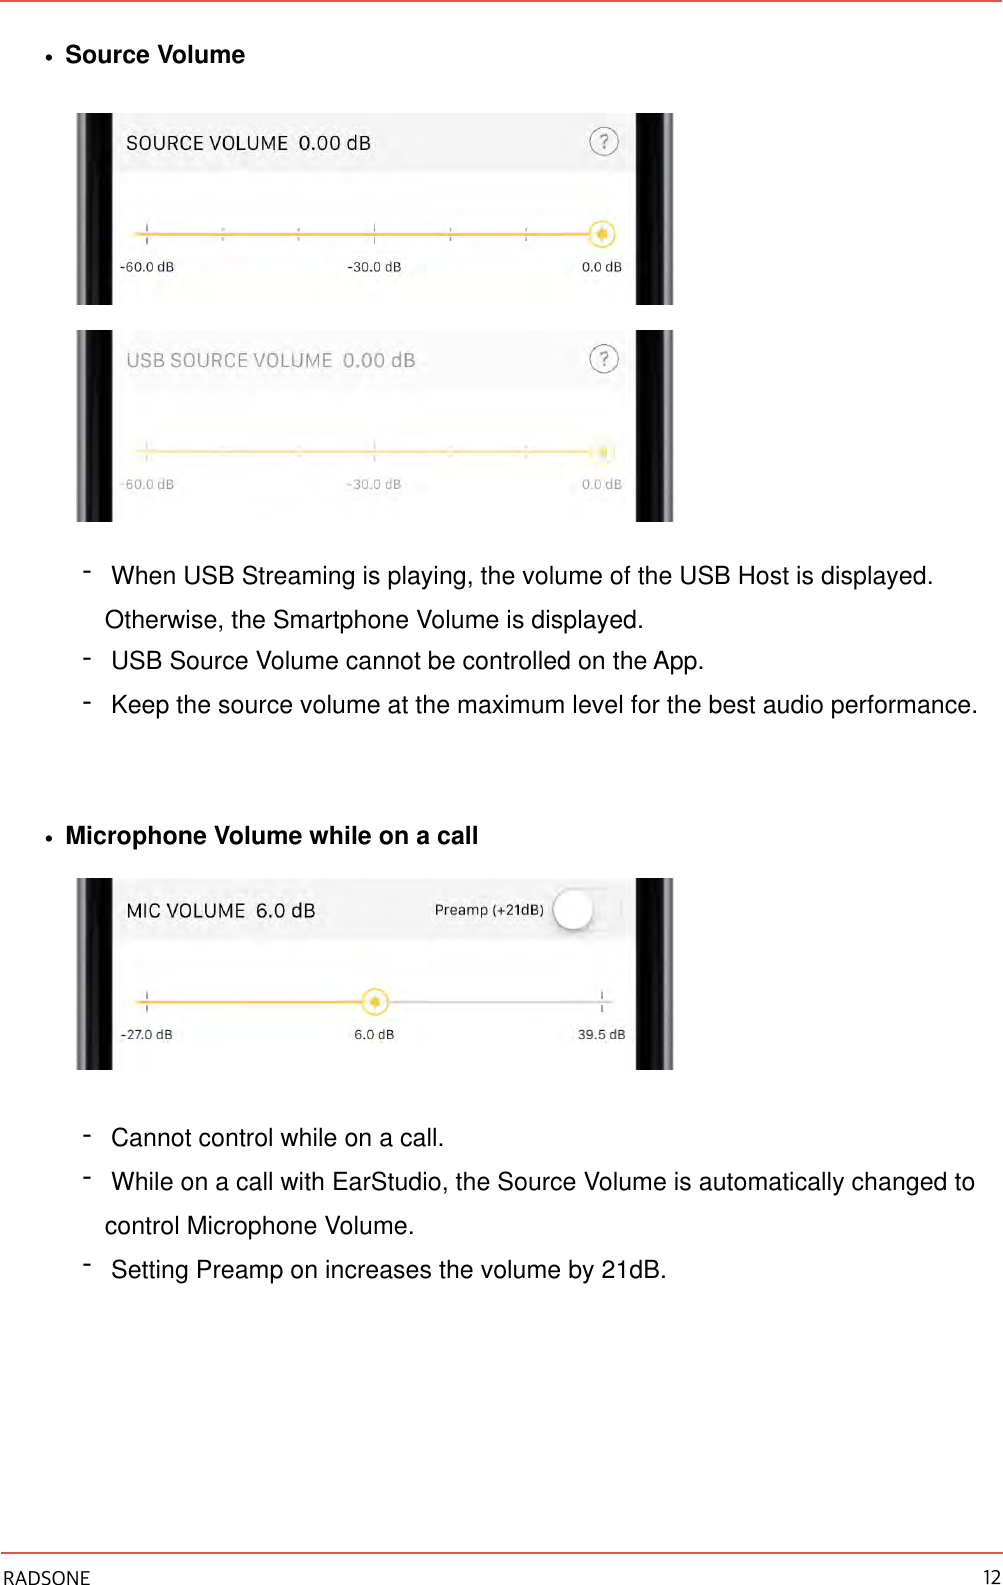 •Source Volume  -When USB Streaming is playing, the volume of the USB Host is displayed. Otherwise, the Smartphone Volume is displayed. -USB Source Volume cannot be controlled on the App. -Keep the source volume at the maximum level for the best audio performance. •Microphone Volume while on a call  -Cannot control while on a call. -While on a call with EarStudio, the Source Volume is automatically changed to control Microphone Volume. -Setting Preamp on increases the volume by 21dB. RADSONE 12